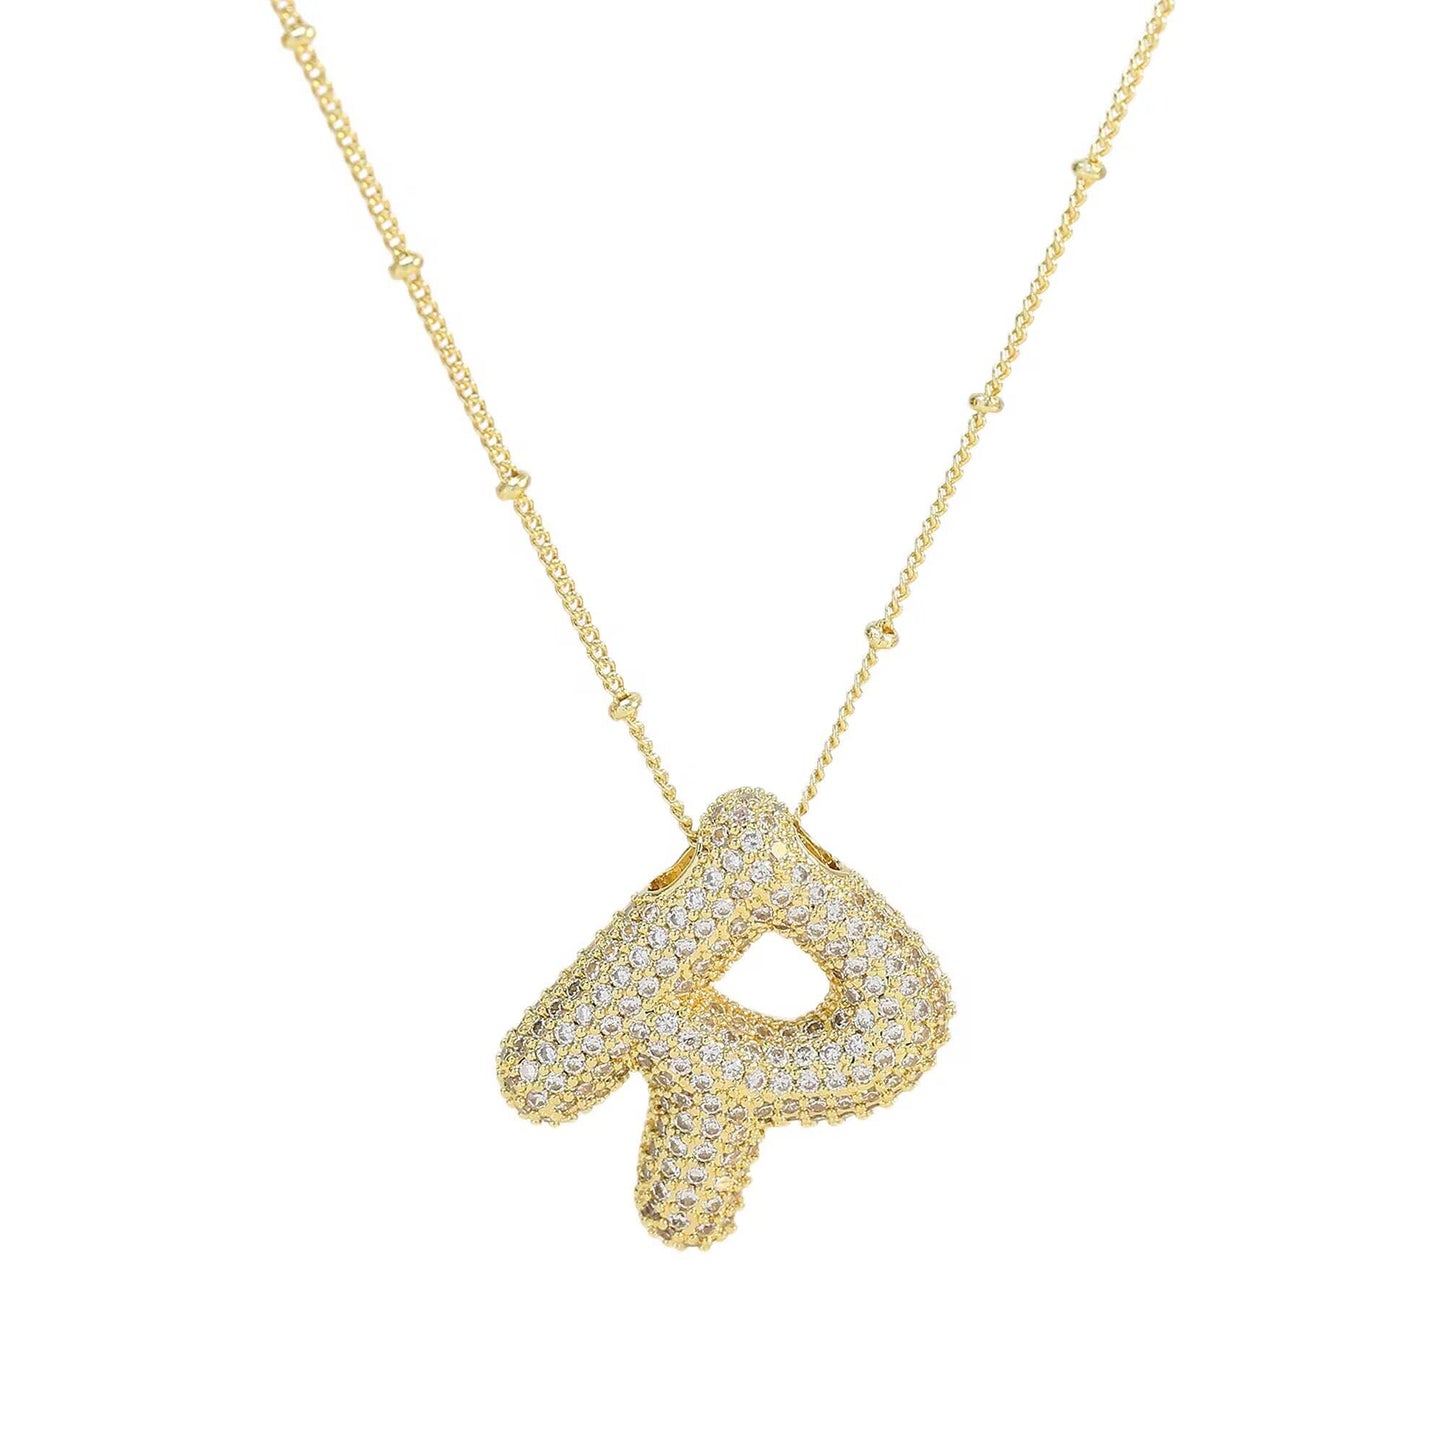 Initial CZ Balloon Bubble 18K Gold Necklace: A